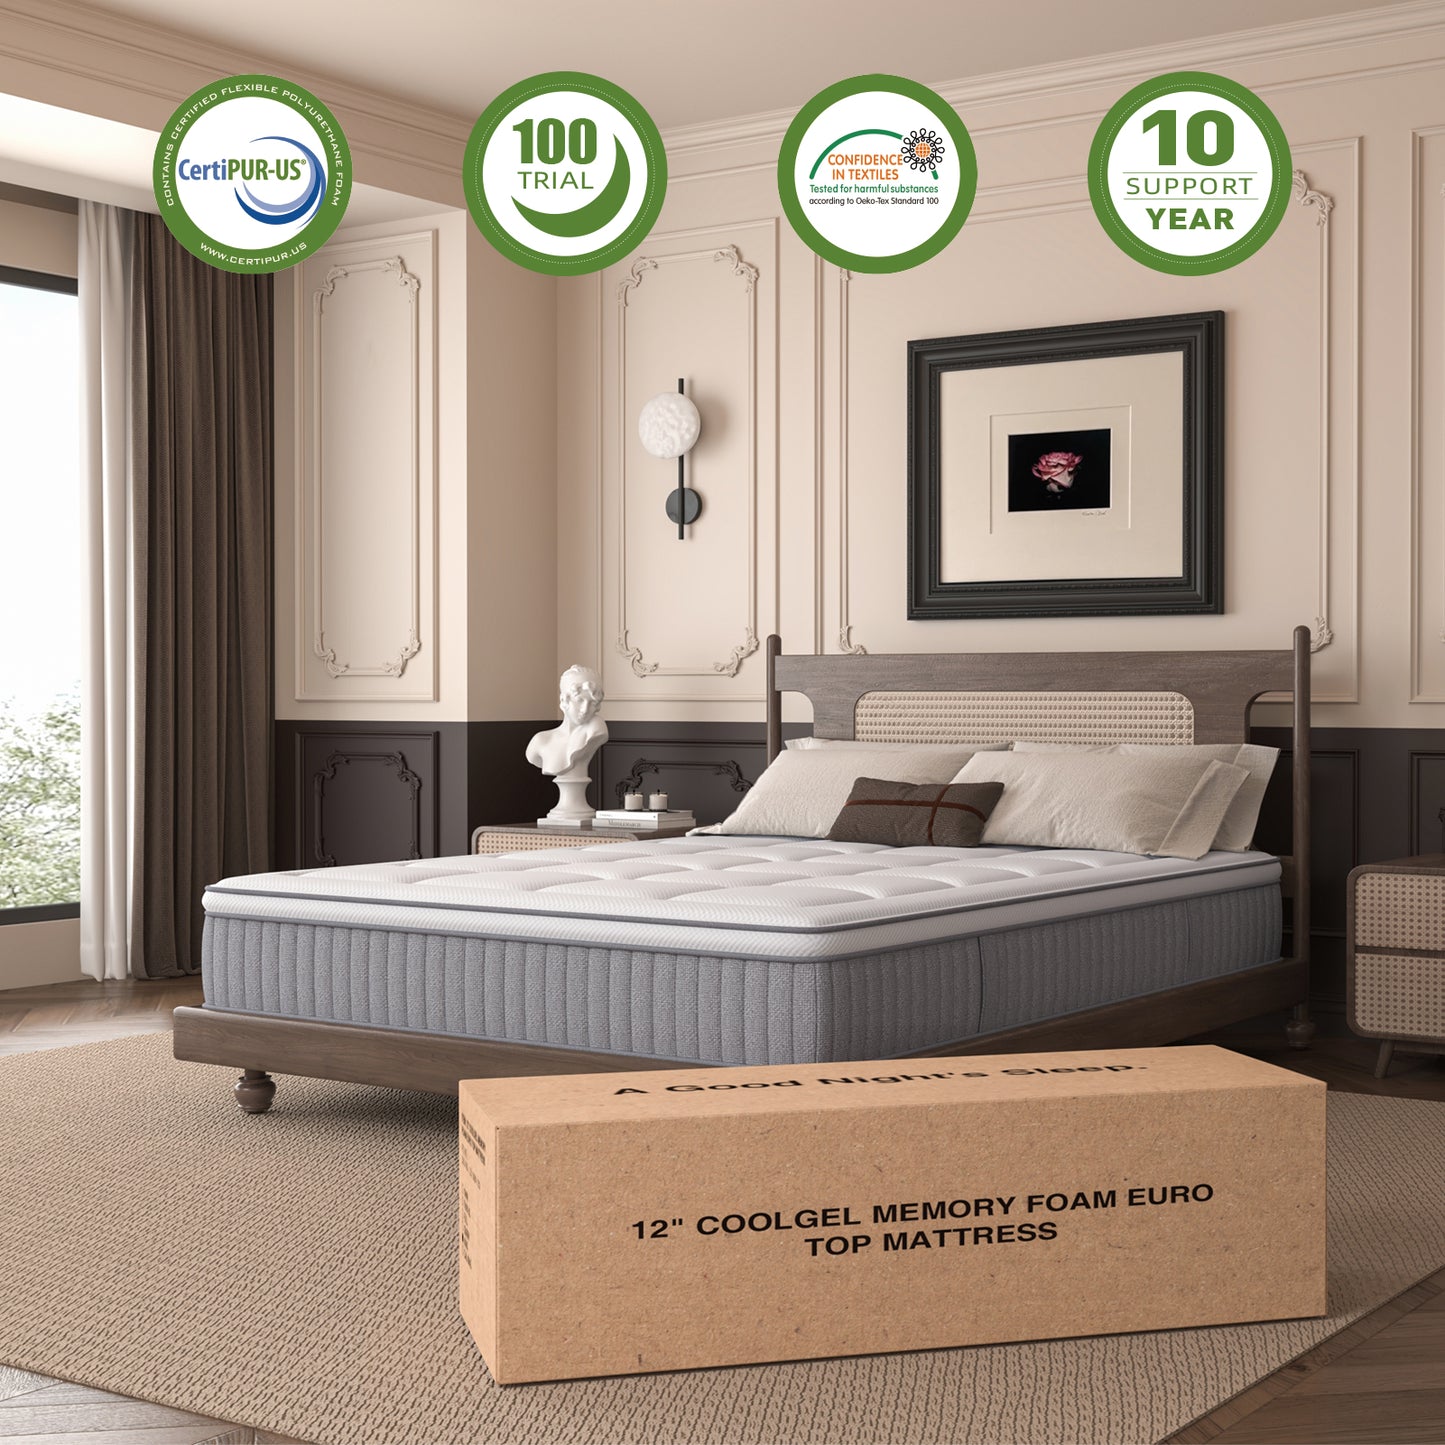 DIGLANT 12 Inch Hybrid Mattress Gel Memory Foam with Individual Pocket Springs, Medium Feel Hybrid Mattress for Back Pain Relief, Balanced Support Mattress in a Box, CertiPUR-US Certified